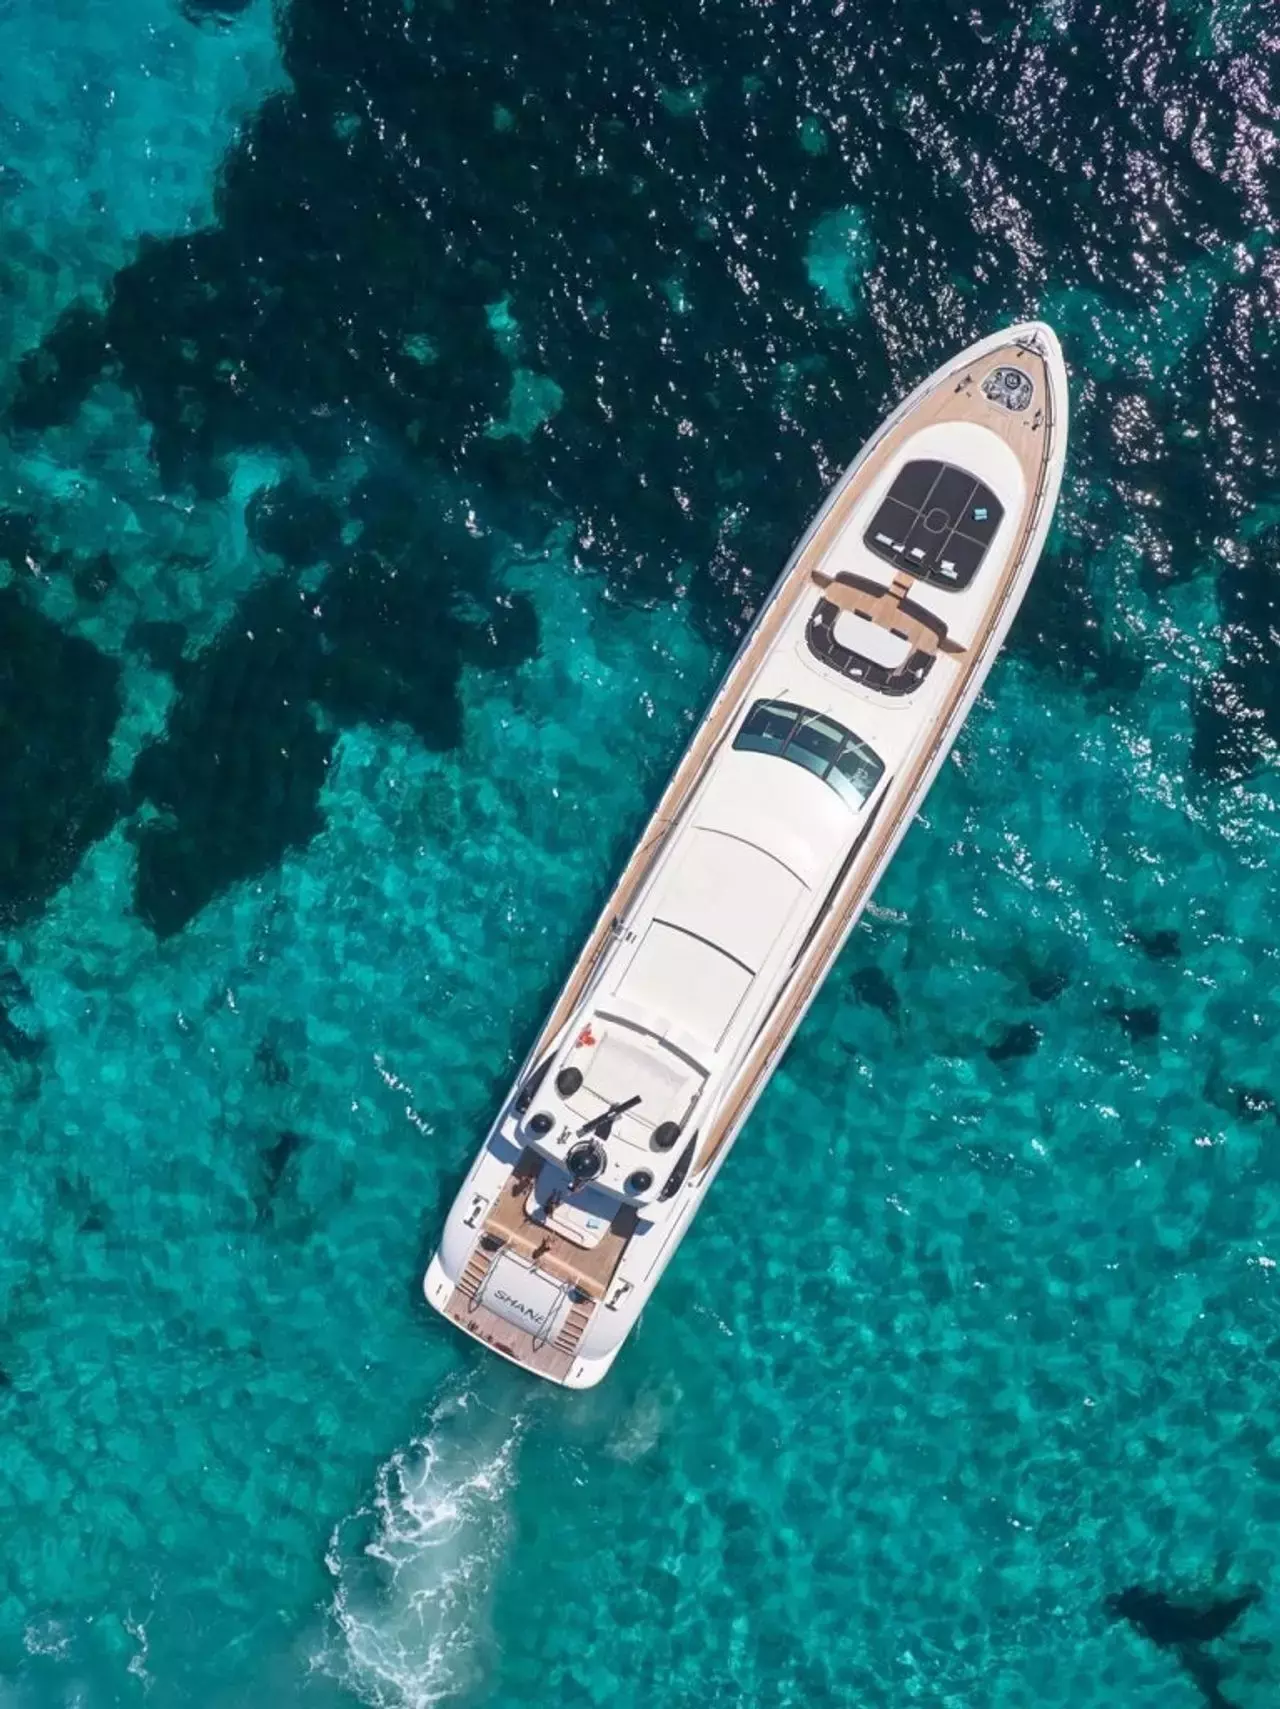 Shane by Mangusta - Top rates for a Charter of a private Superyacht in Spain